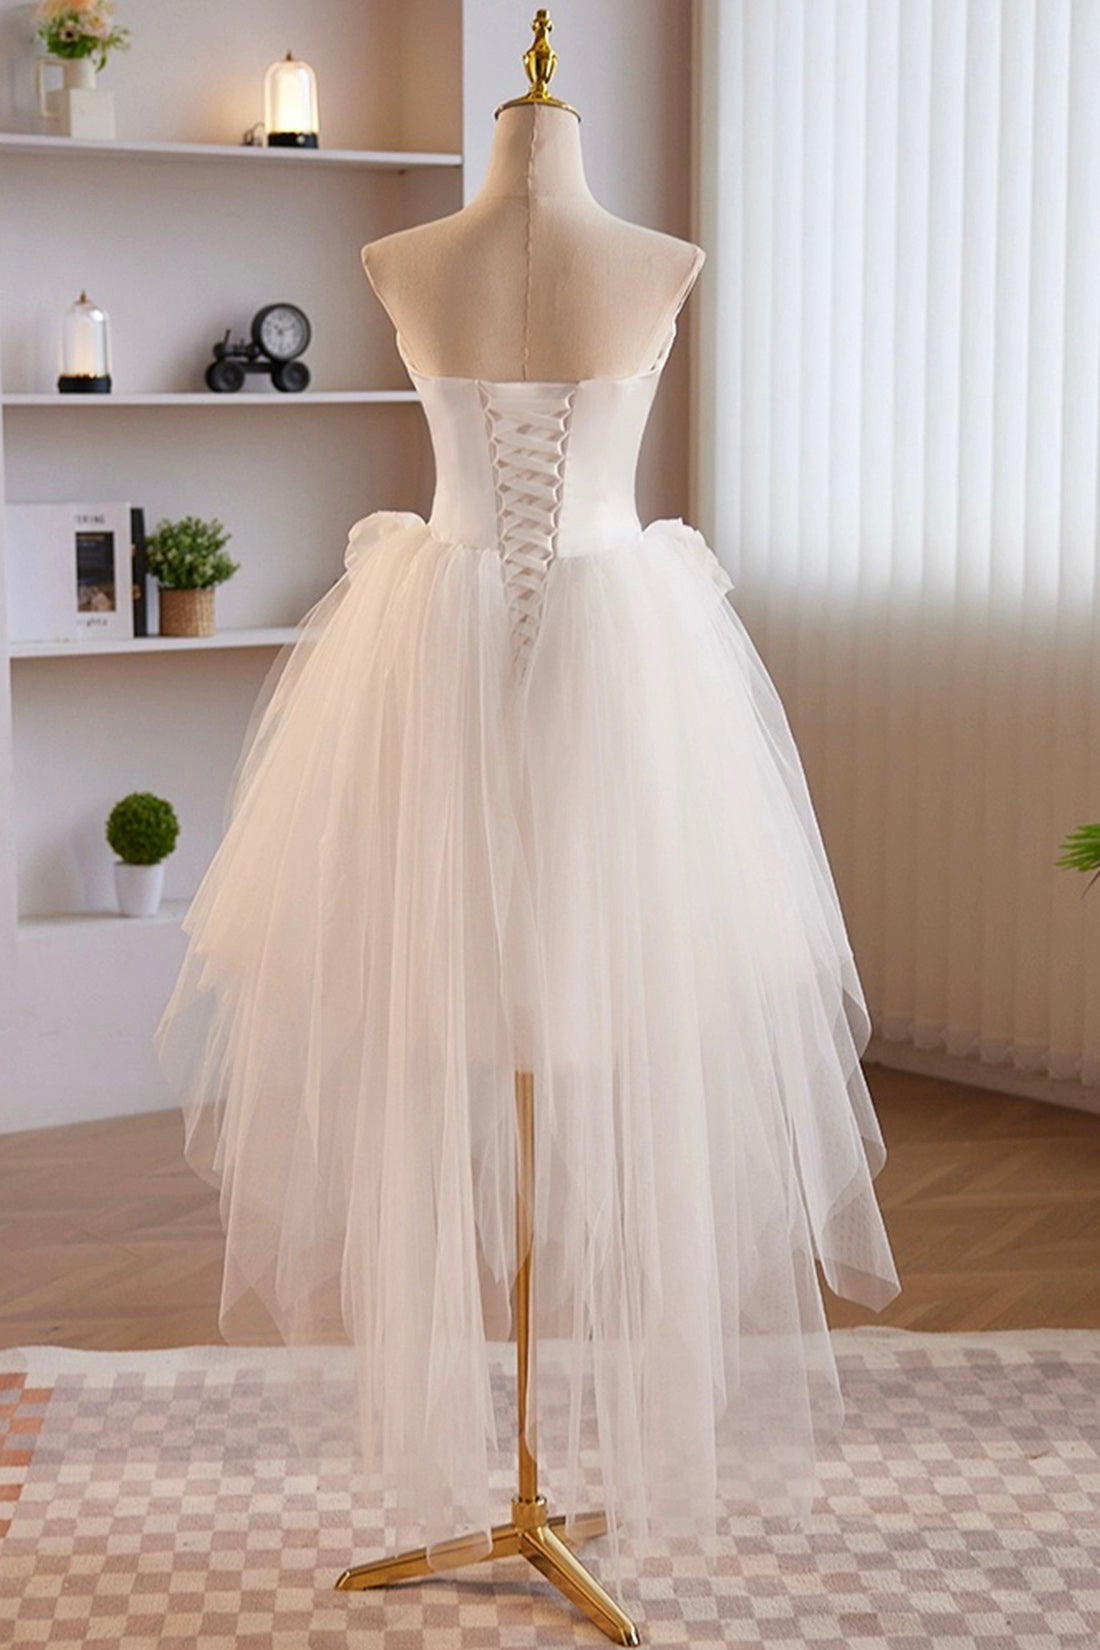 Party Dress Outfits, Unique White Strapless Irregular Tulle Short Prom Dress, White Party Dress